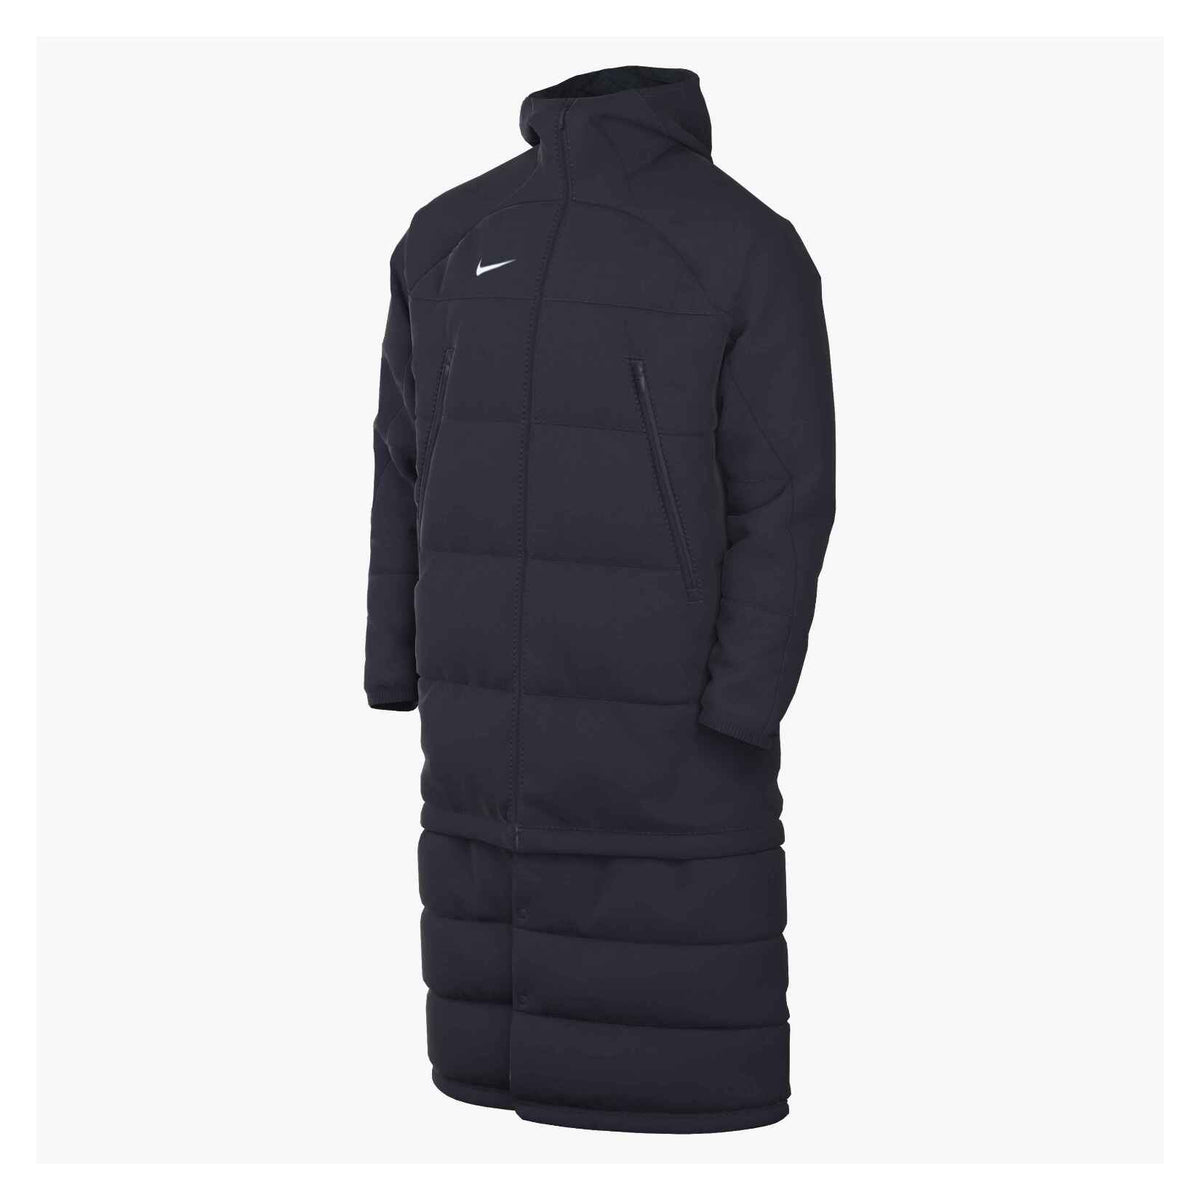 Academy Pro 2 in 1 Jacket (Youth)